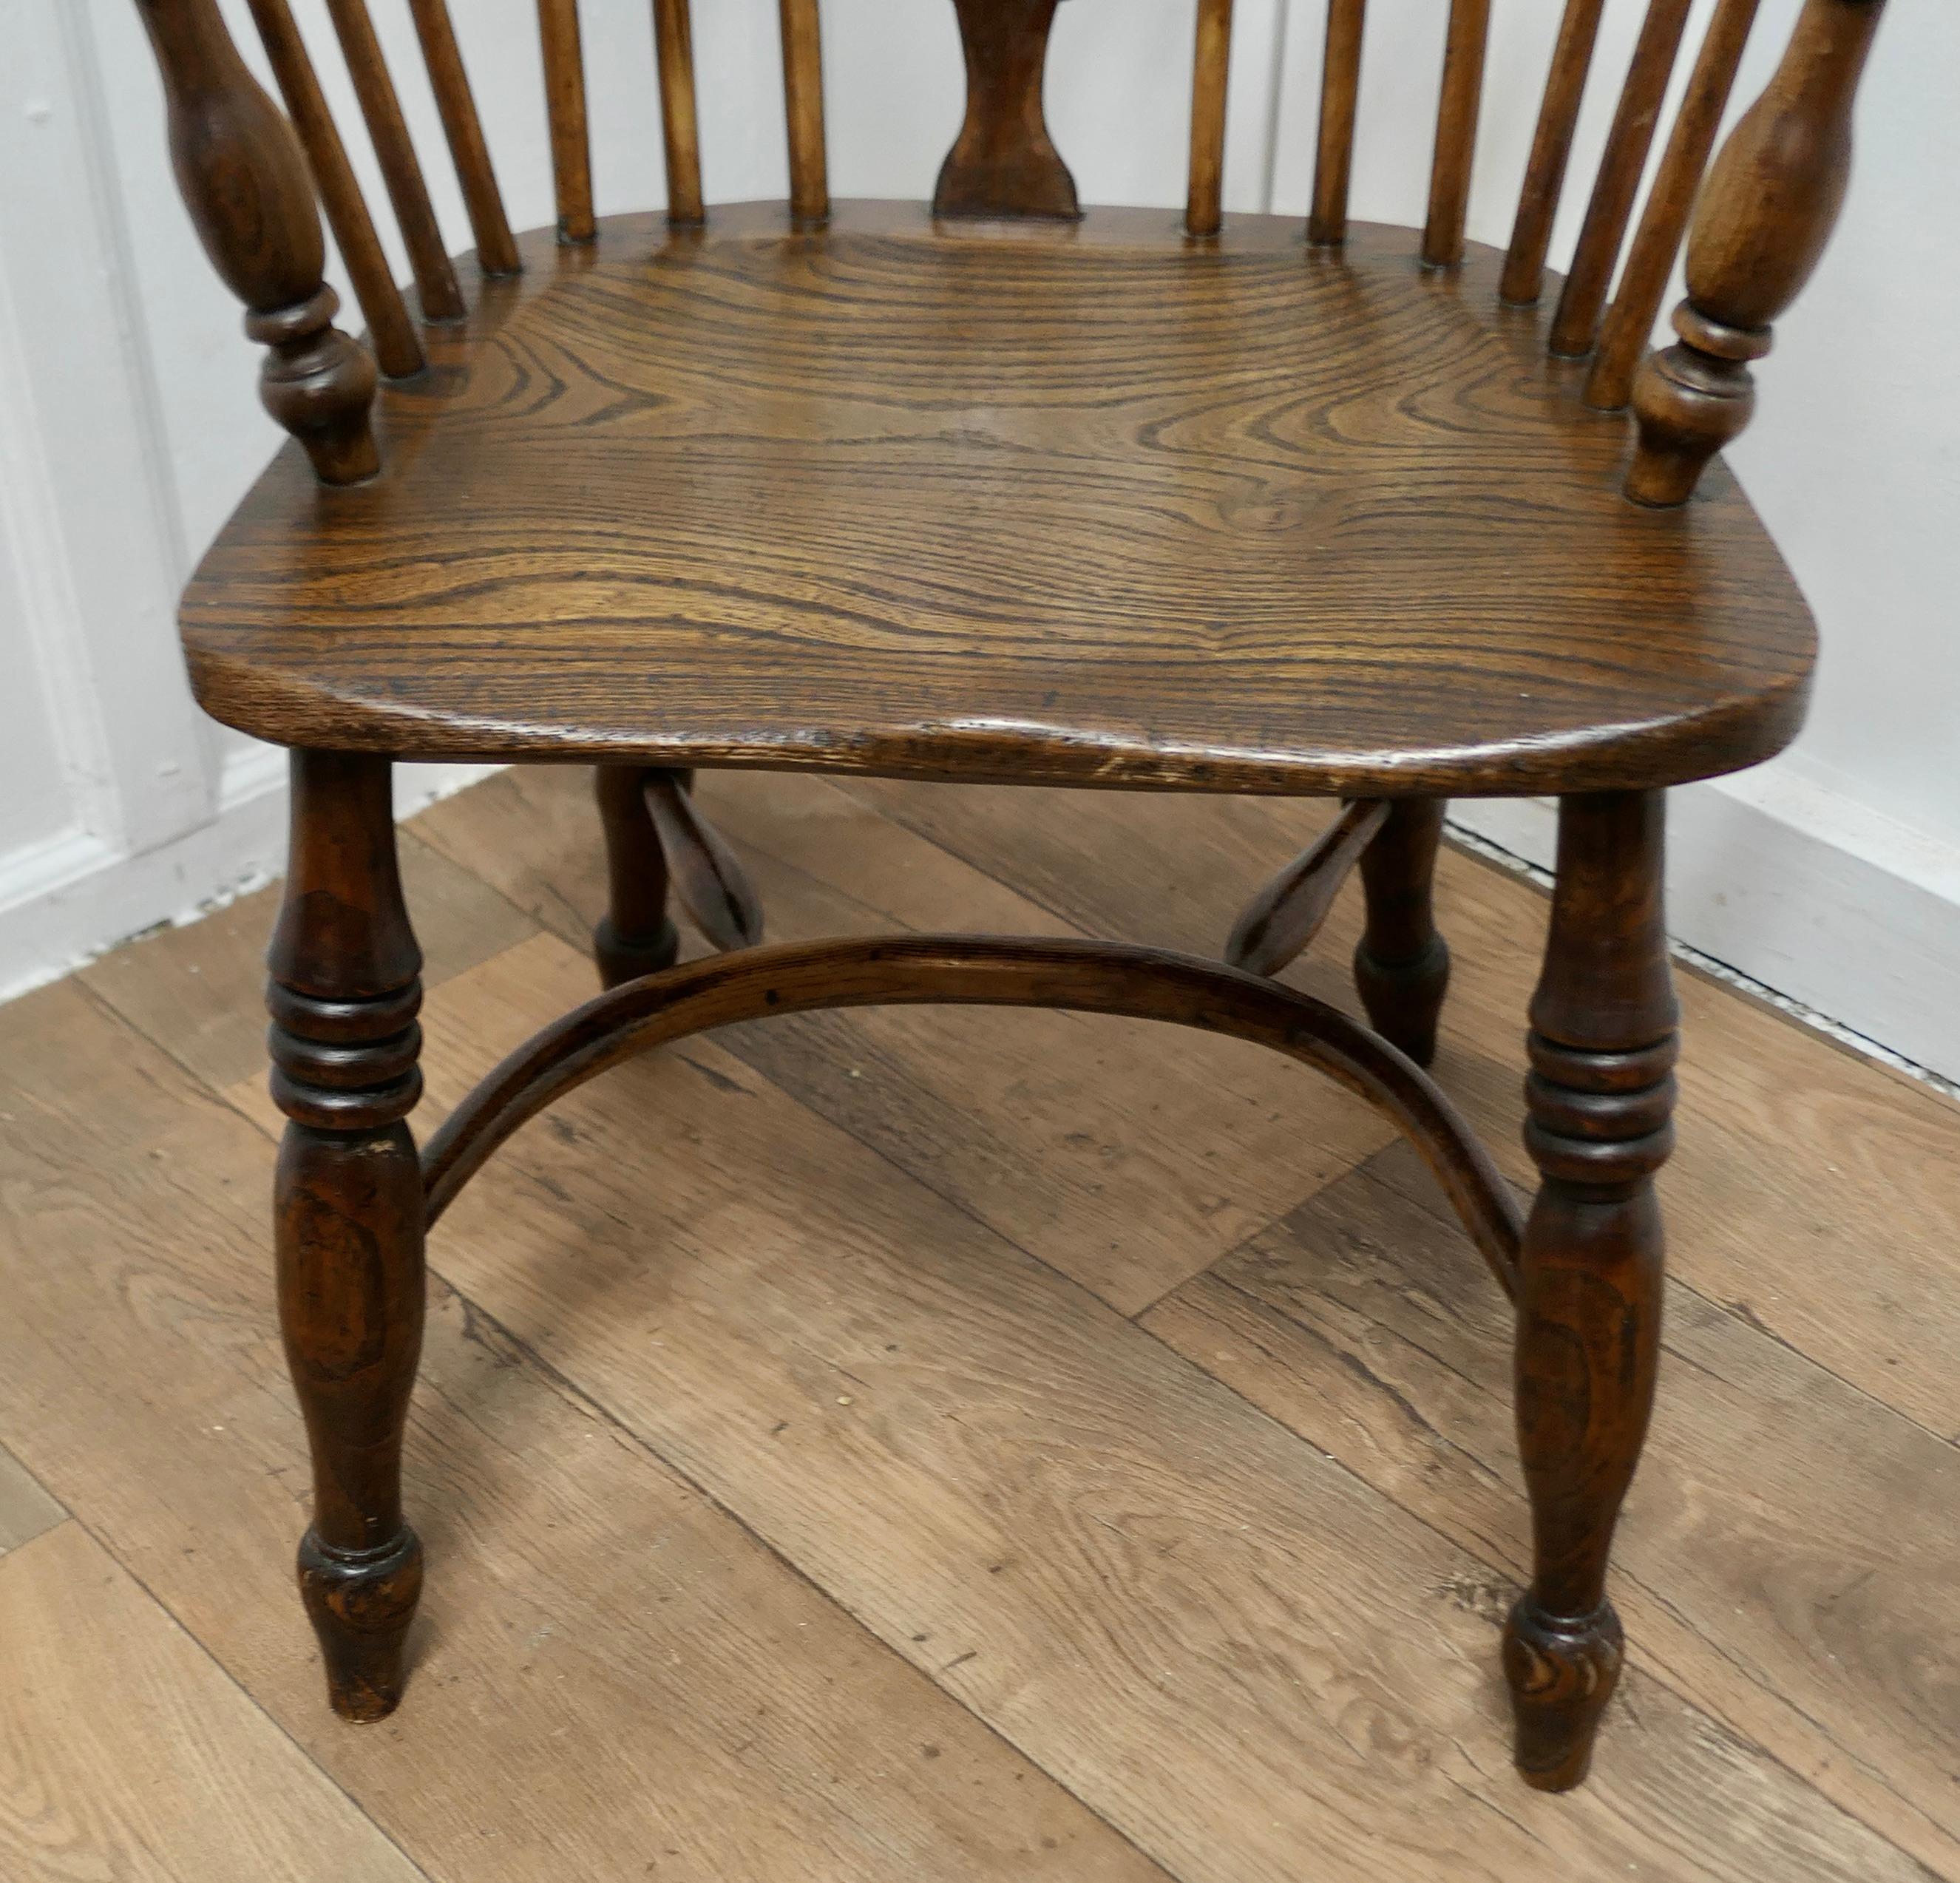 Georgian Elm and Ash Wheel Back Windsor Carver Chair

 This is an early 19th Century chair made from Elm with an Ash hooped back in the traditional Windsor style, it has a saddle seat and beautifully shaped crinoline stretcher under
This is a sturdy